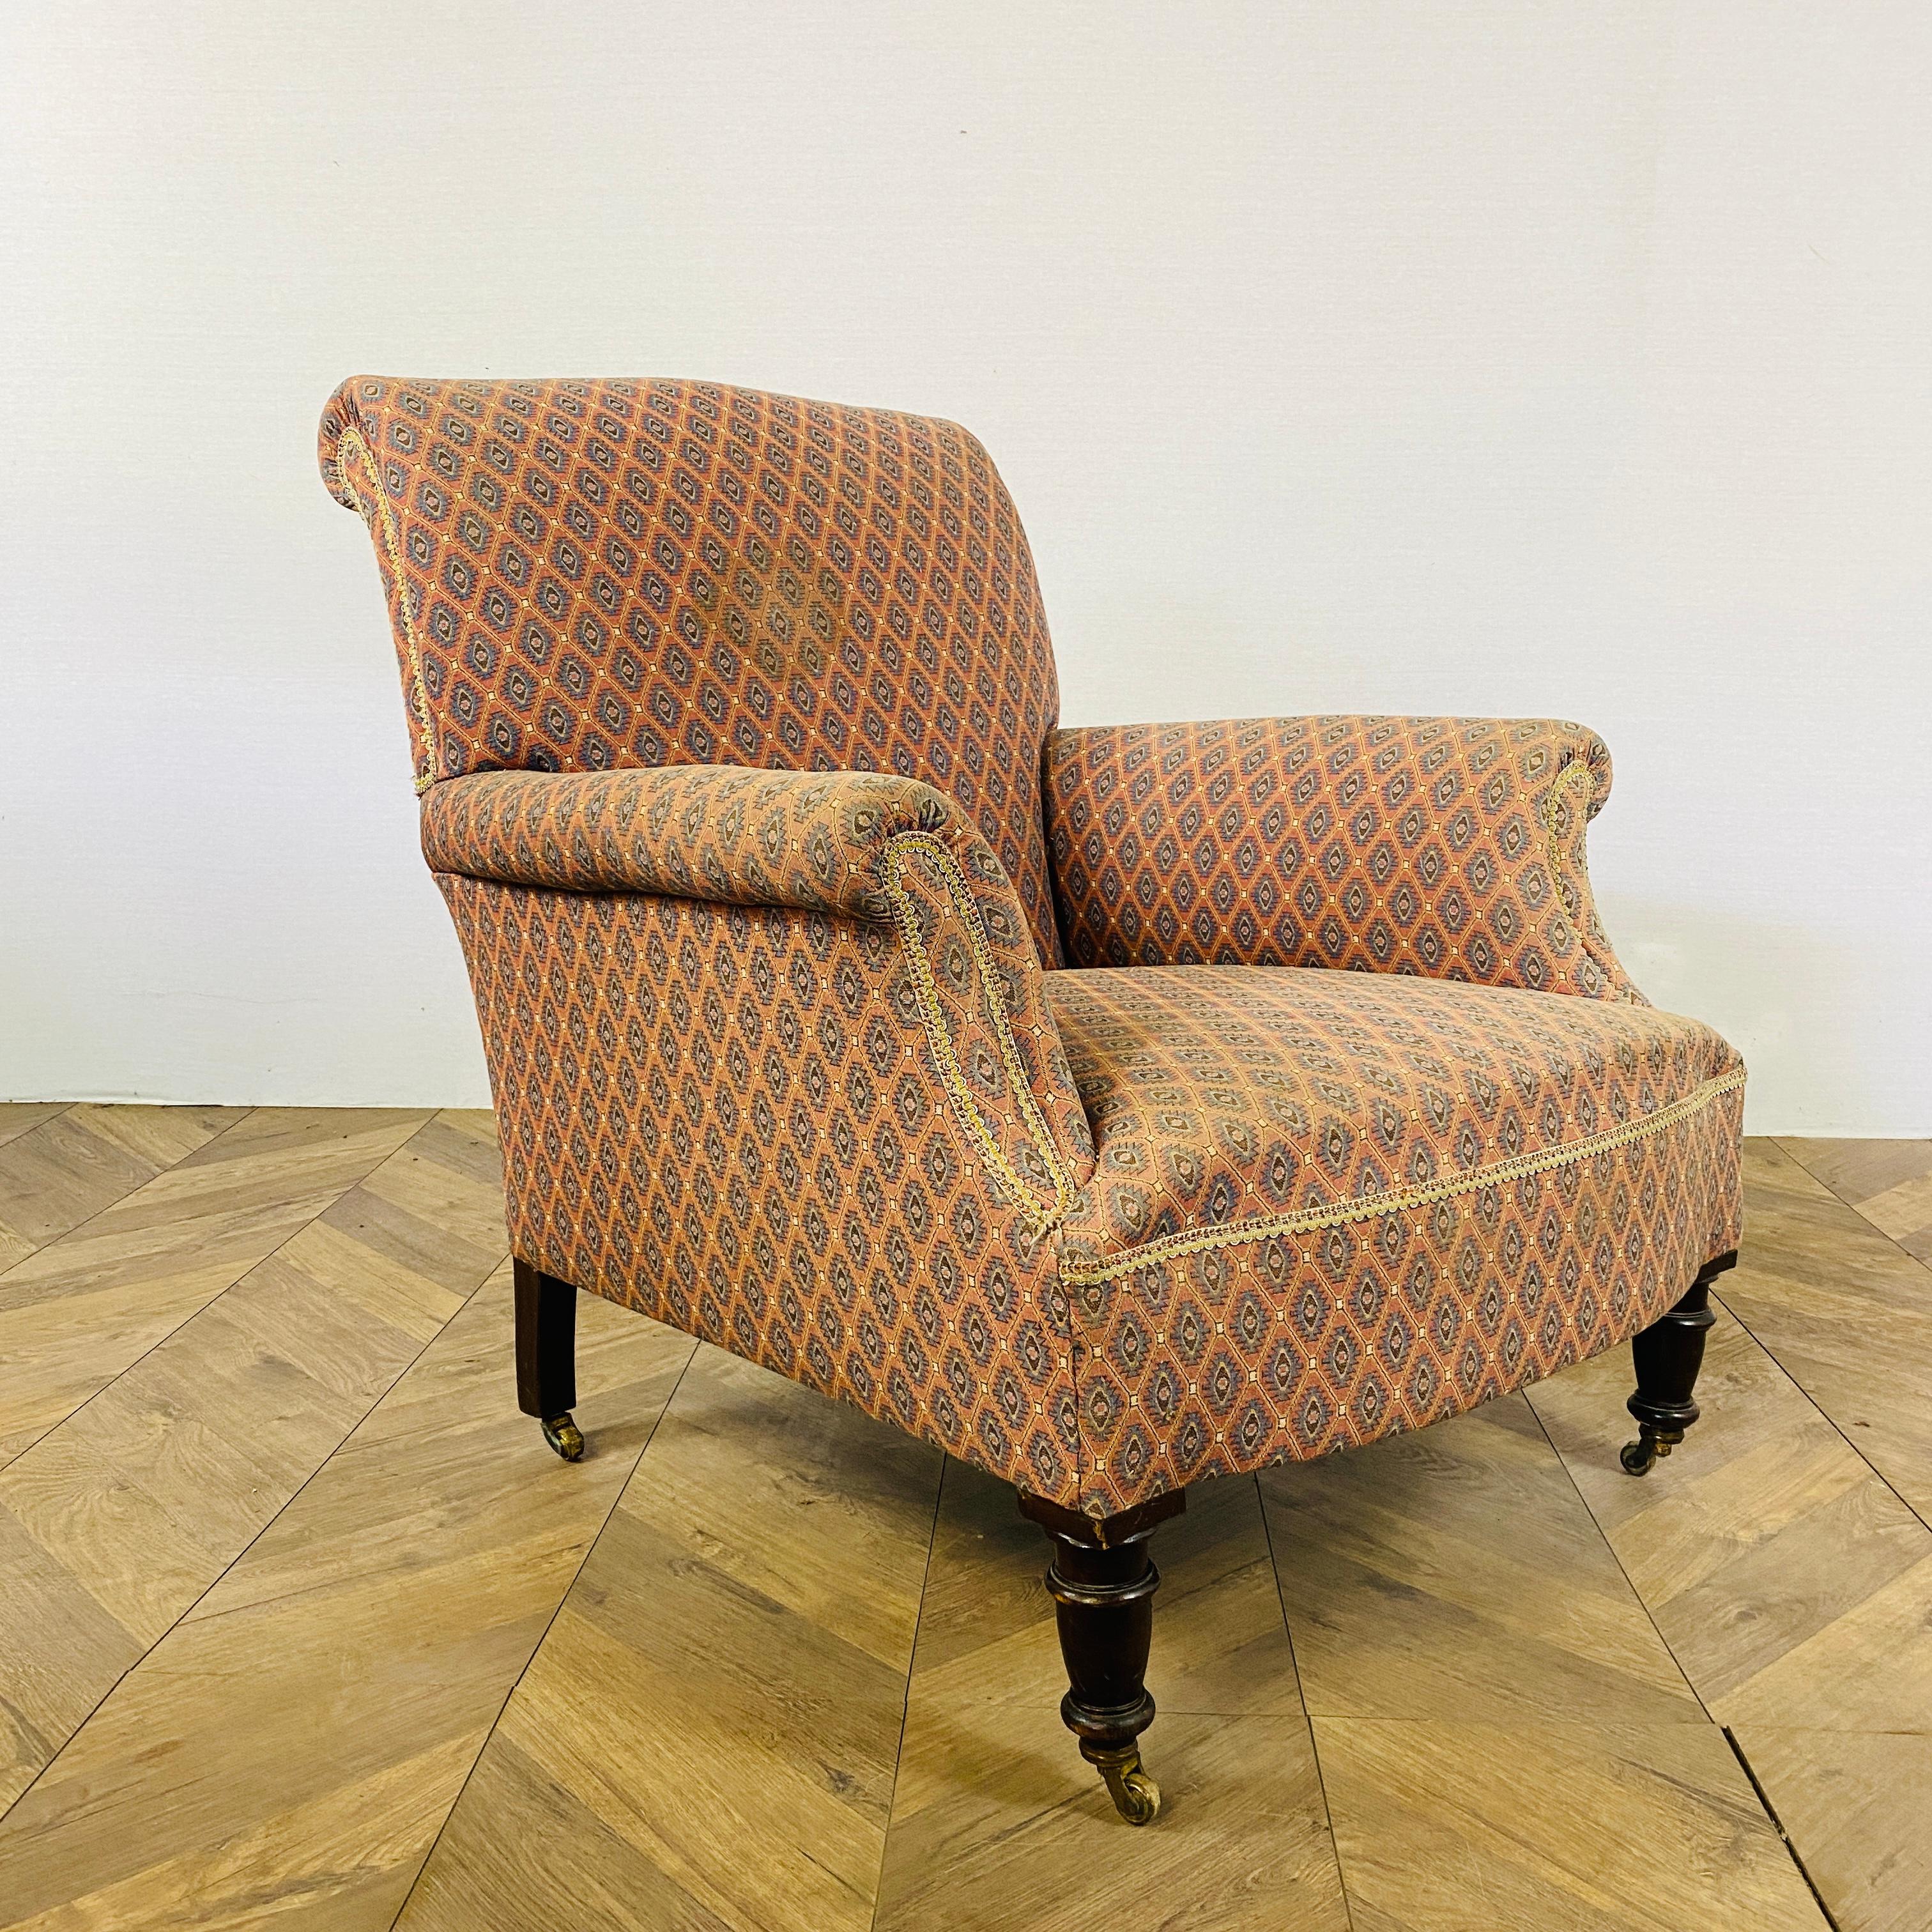 A Well Proportioned, Victorian Library Armchair, in the manner of Howard & Sons or Jas Shoolbred. Circa 1890s.

The armchair features a lovely a rolled top, turned front legs and set on original brass casters.

The fabric is in fair condition